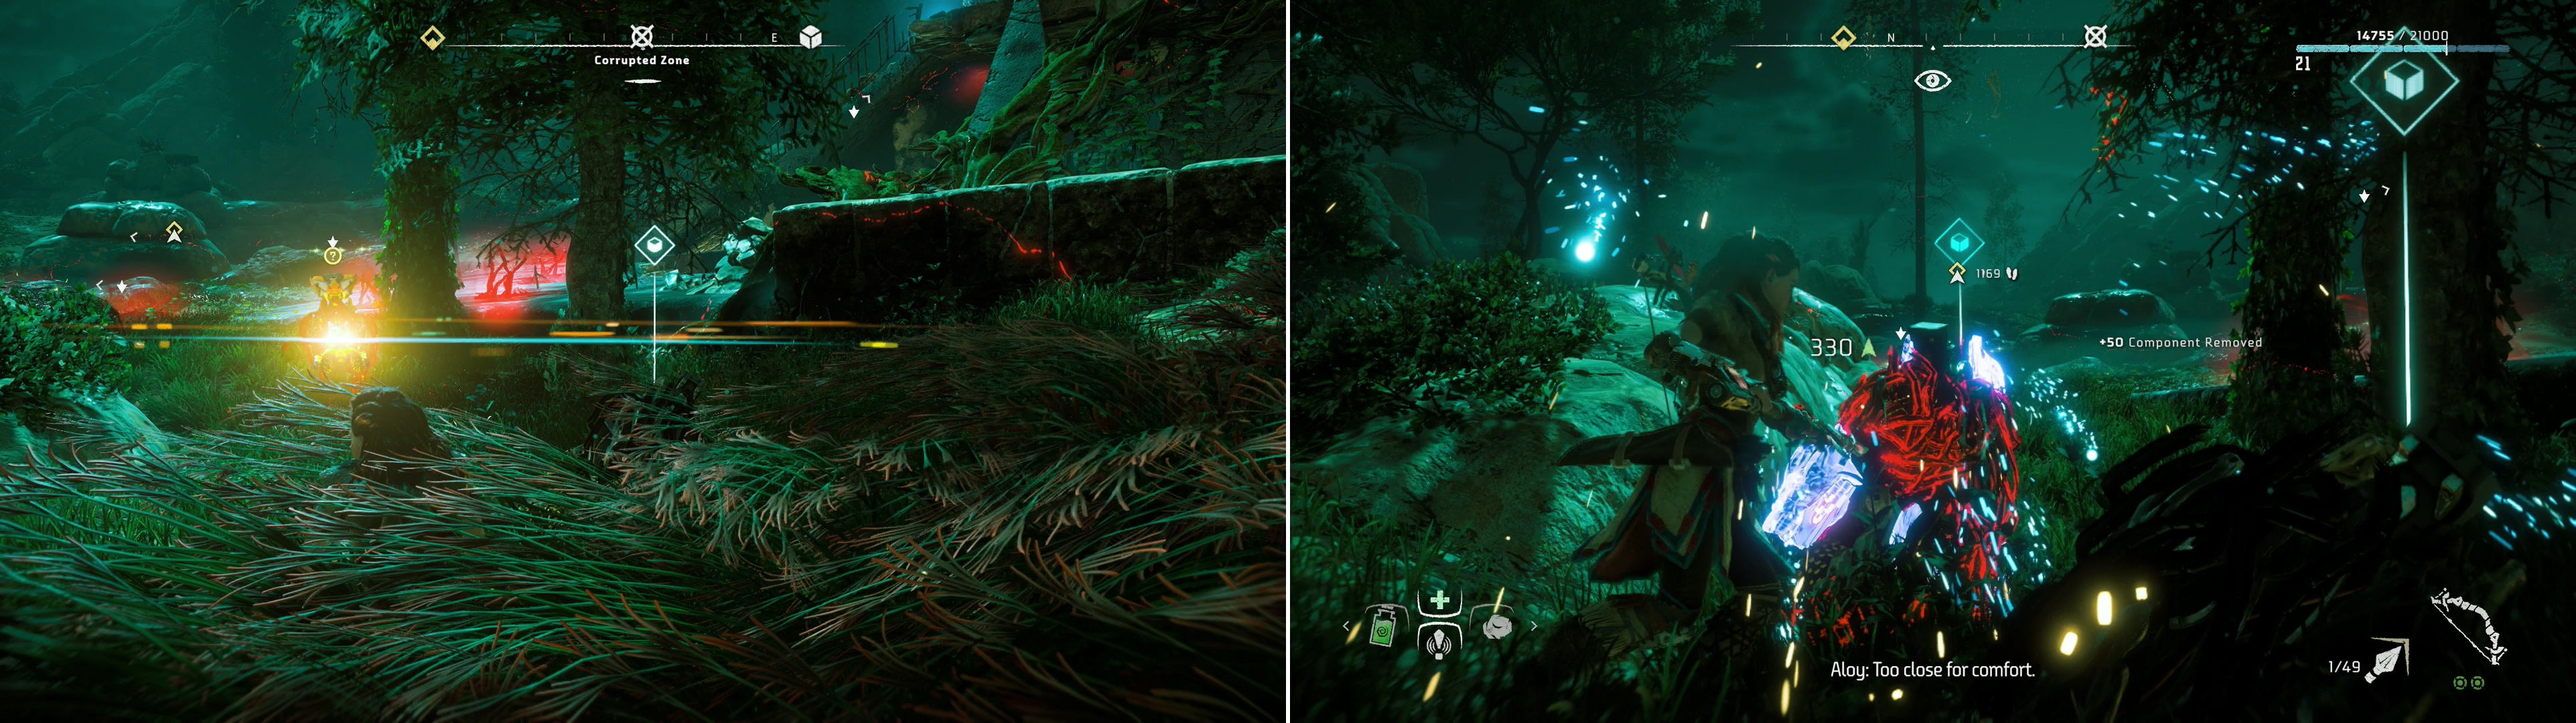 As in the last Corrupted Zone, you can use Lure Call to attract machine (left) and dispatch them quietly with Silent Strike (right).